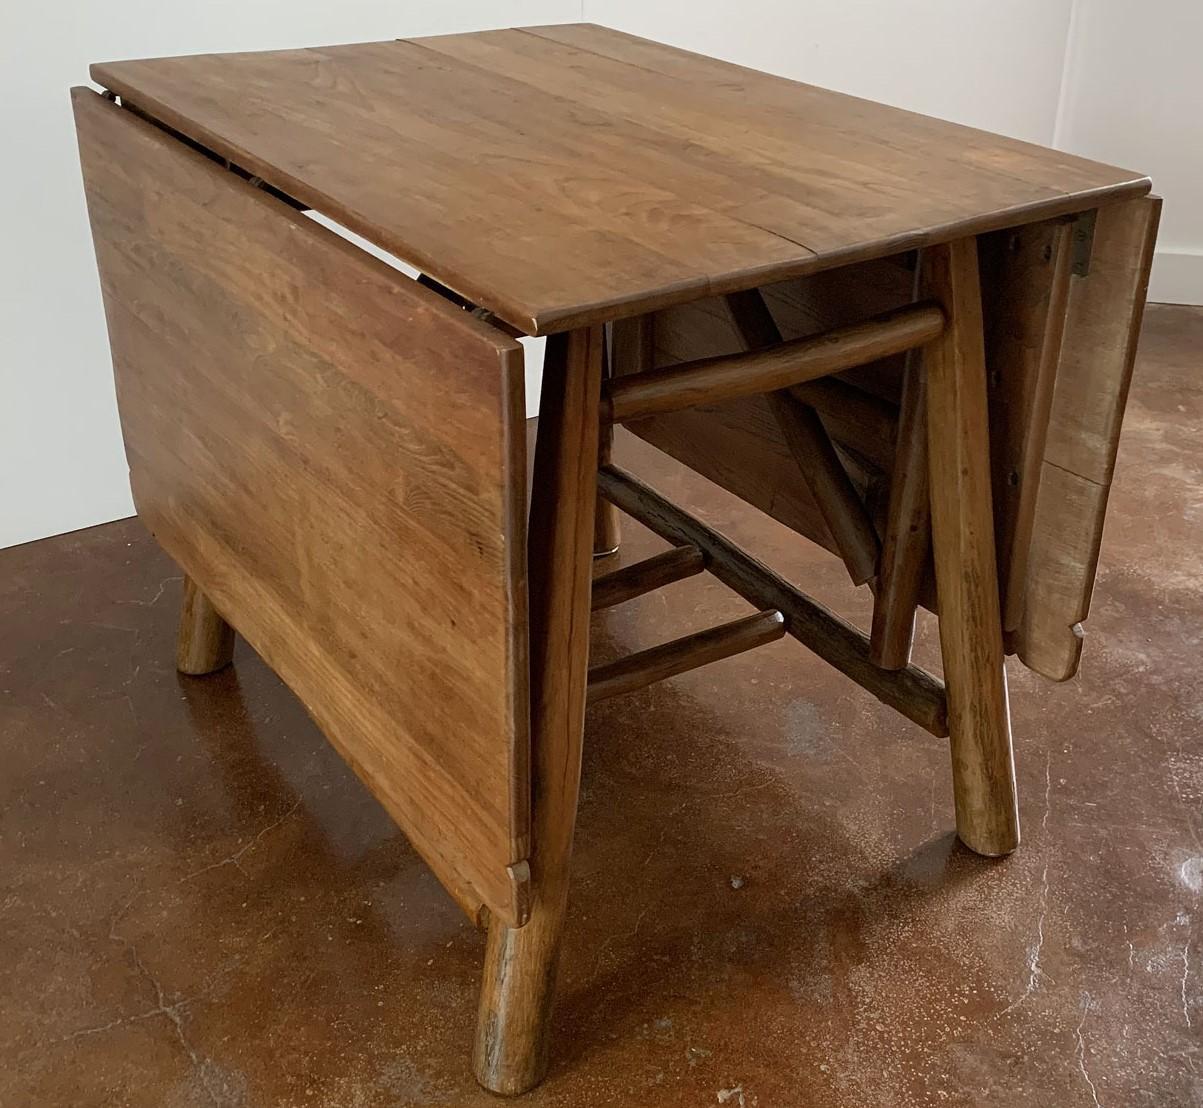 20th C old hickory drop leaf table. Great for a dining or a breakfast nook table.

Closed the table measures 26 x 36
Open the table measures 68 x 36.